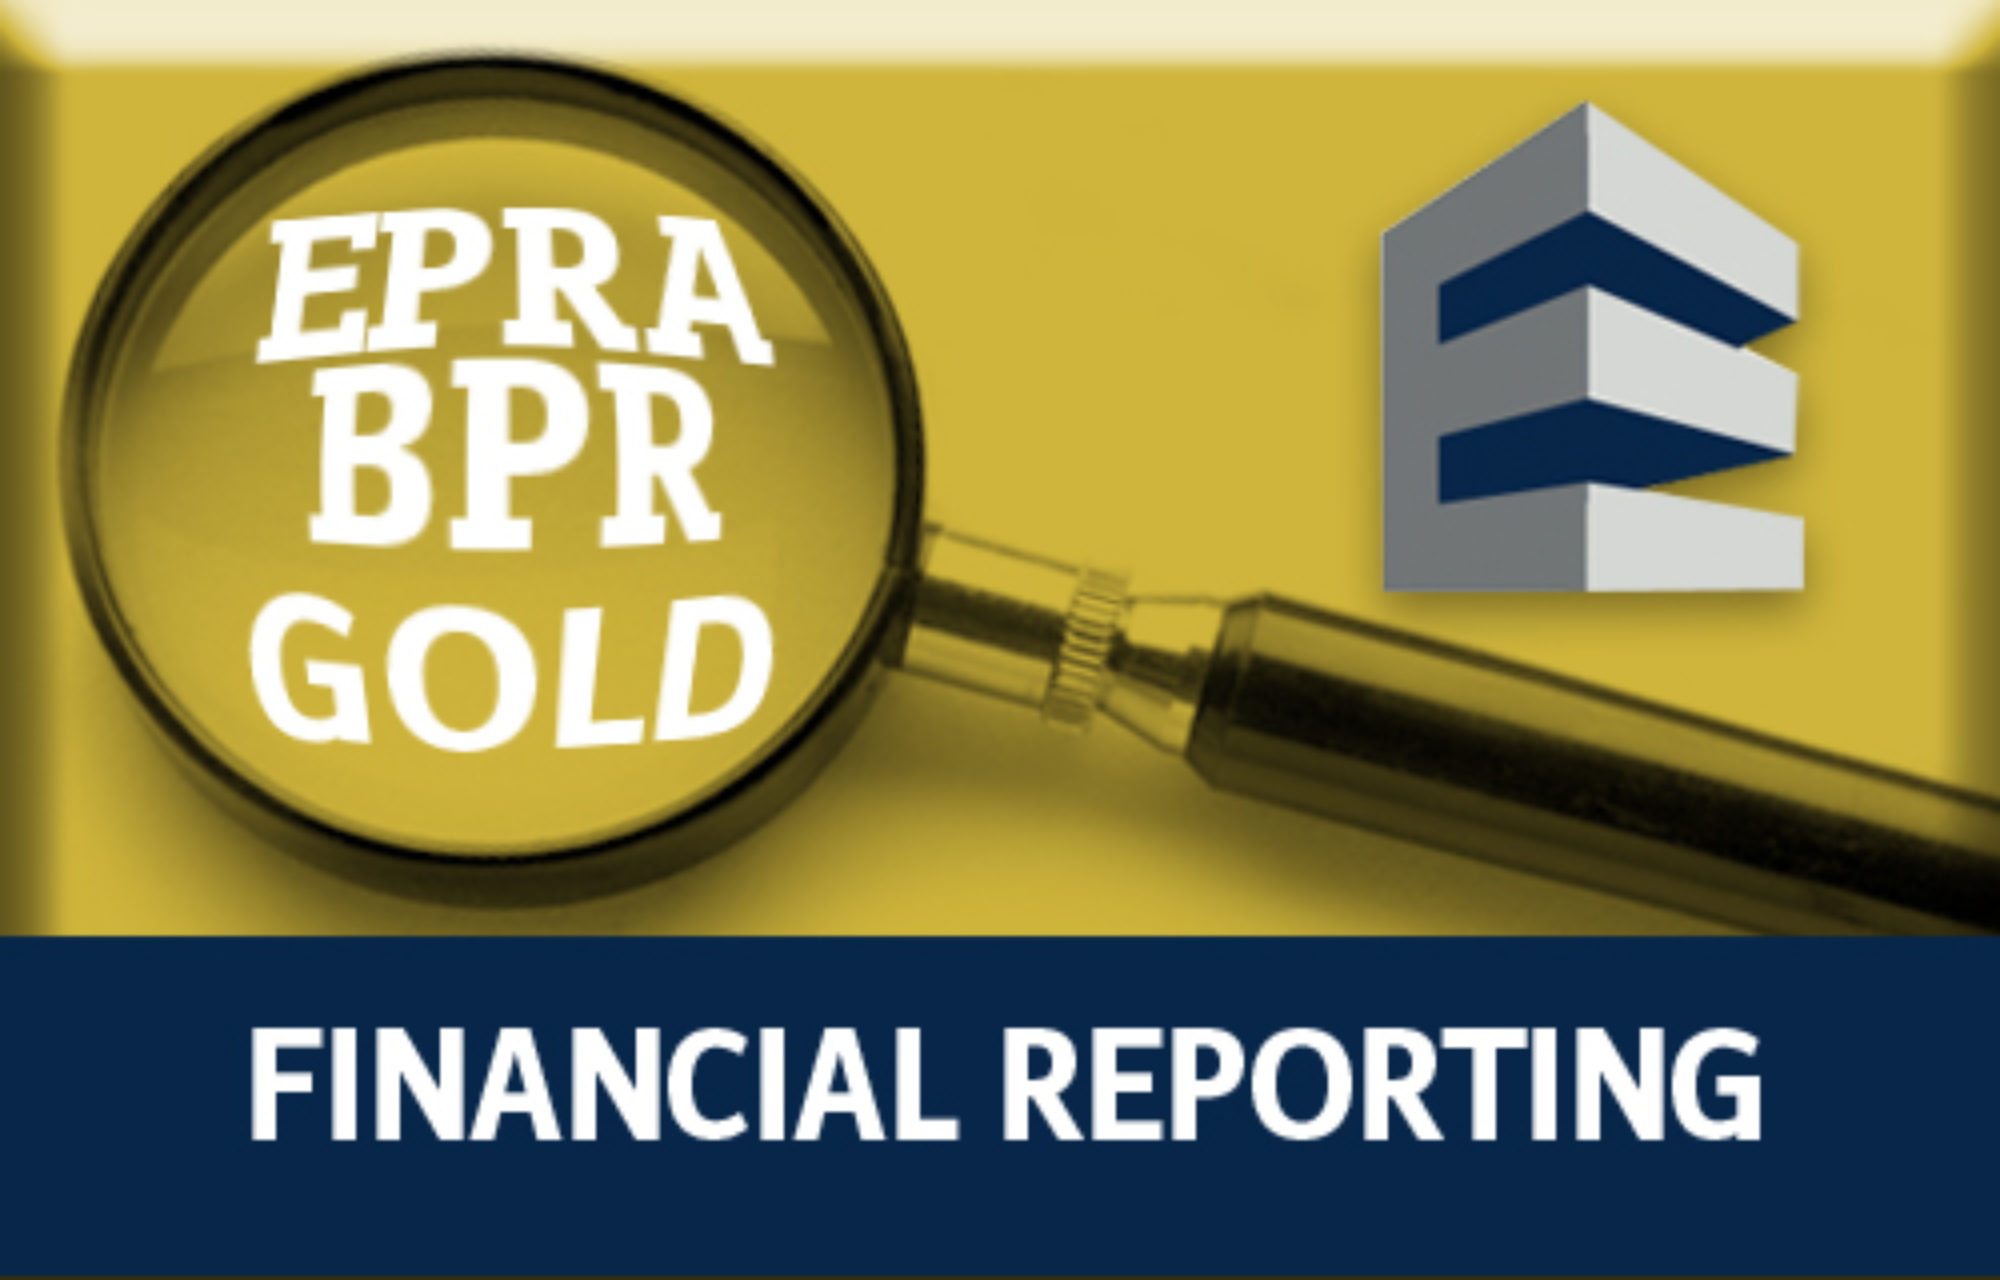 Derwent London wins EPRA Gold for its 2013 annual and sustainability reporting